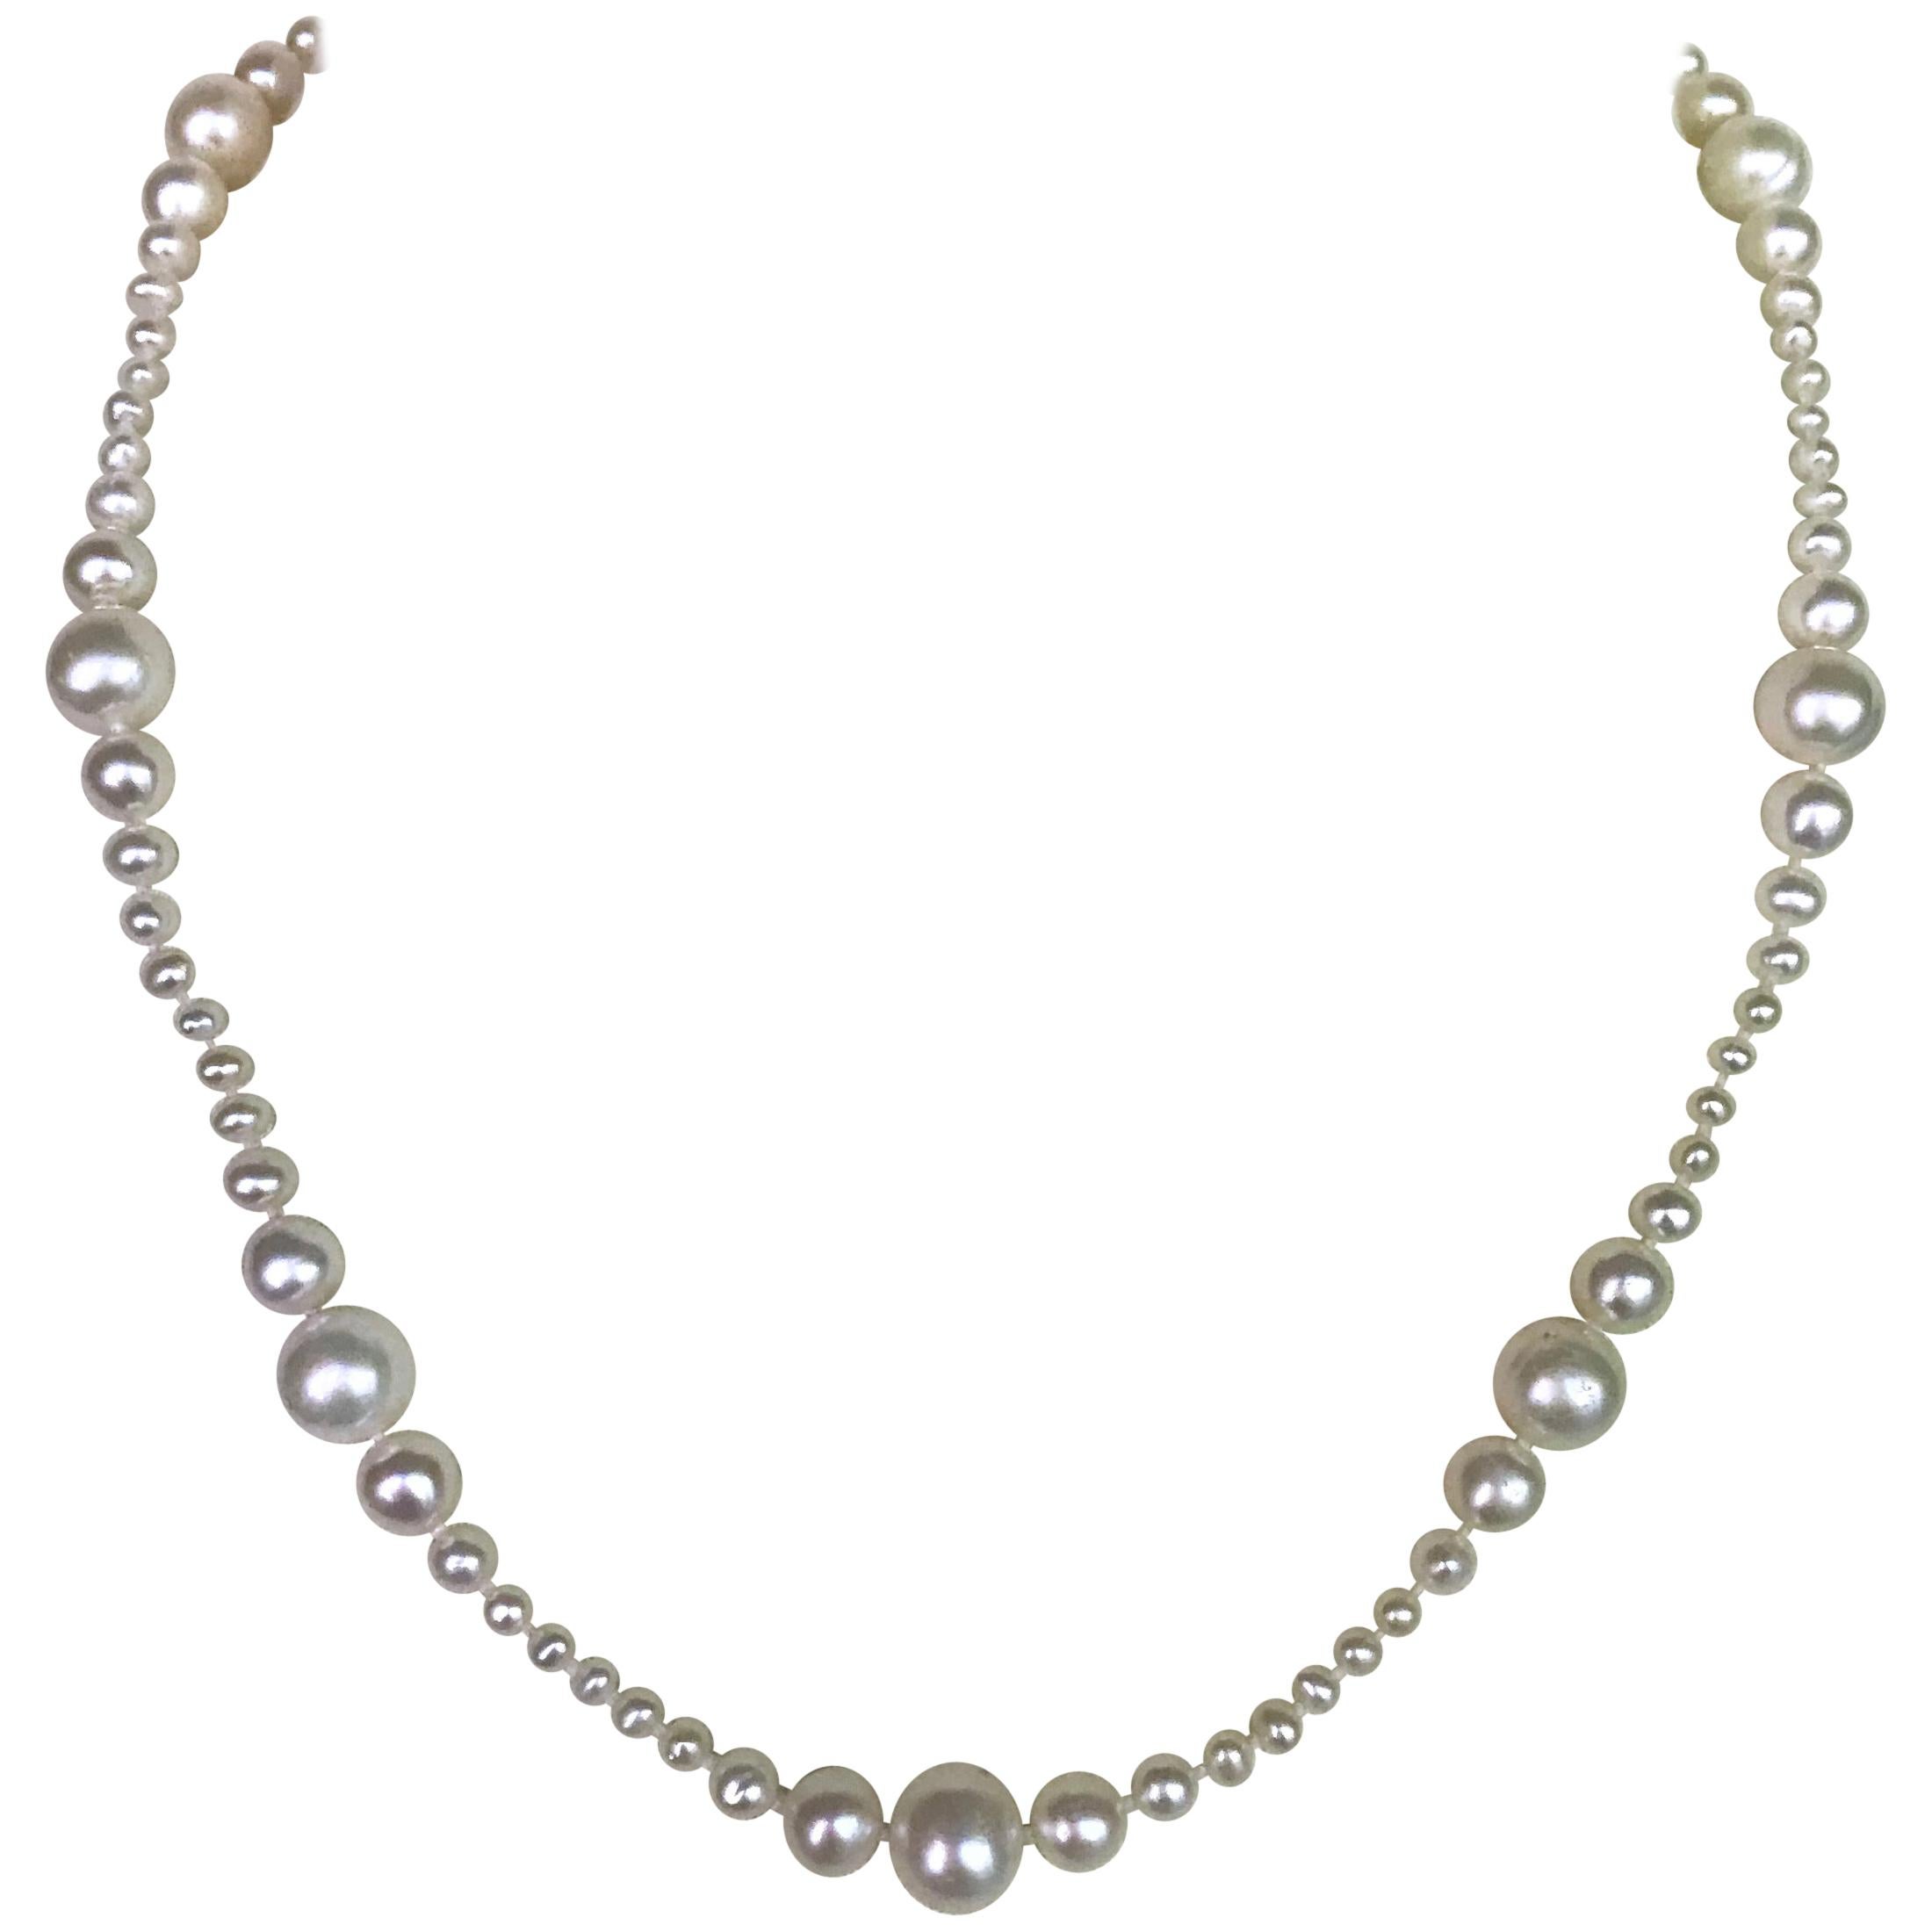 This beautiful classic graduated version of the white pearl necklace was handmade and handpicked by Marina J. to create a perfectly graduated necklace. The pearl beads measure from 1.5 to 8 mm. This necklace measures 21